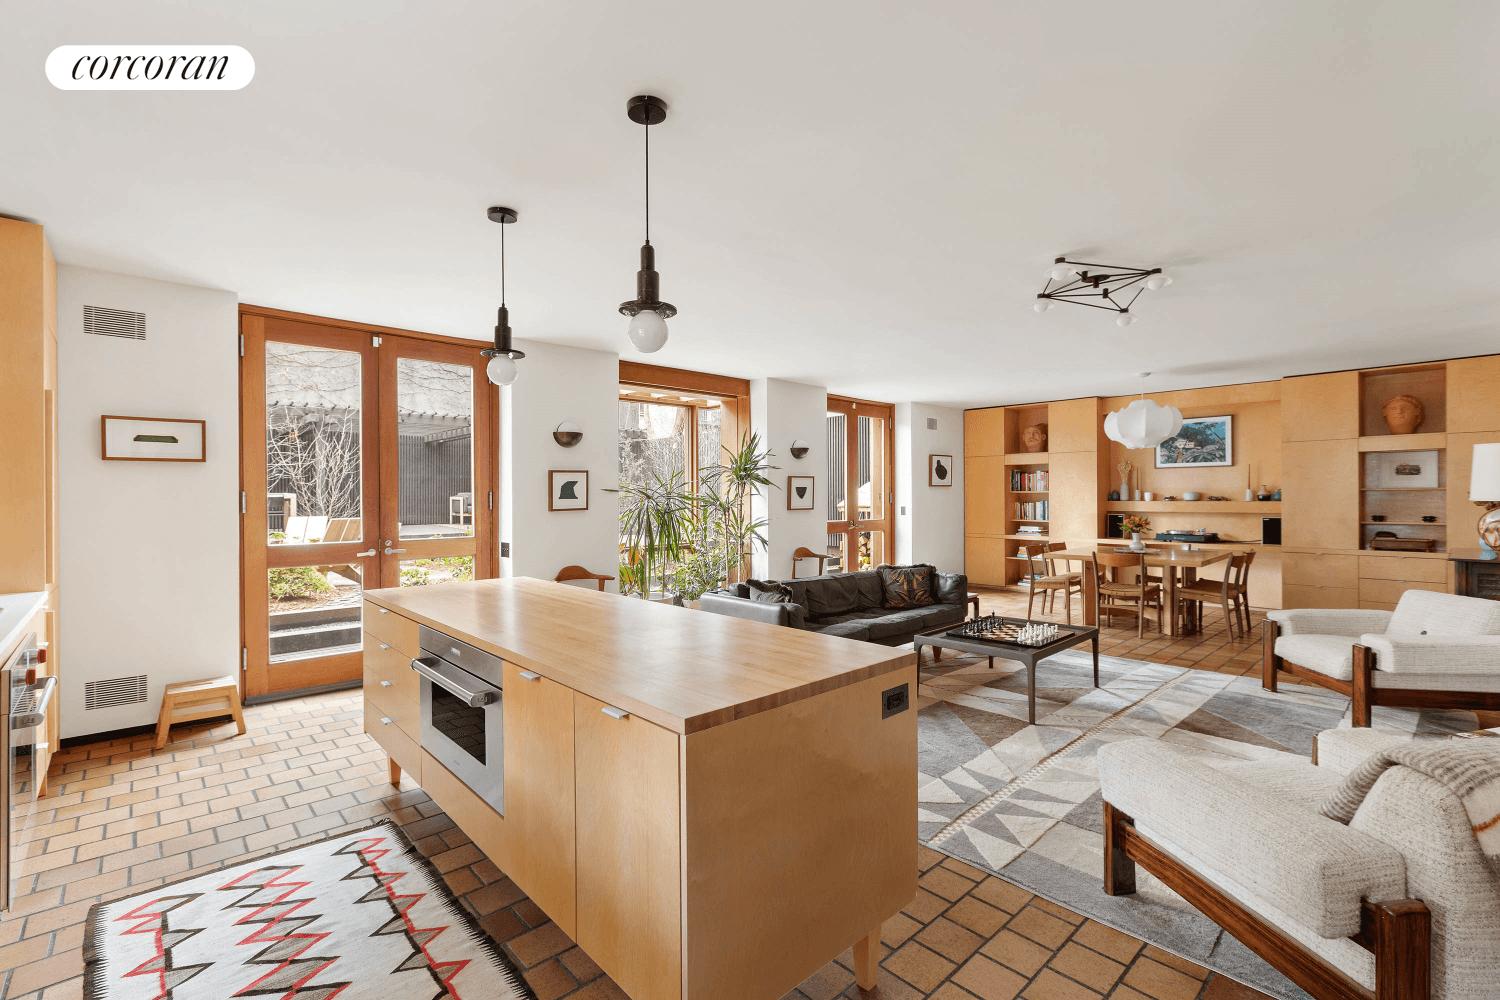 As the design world turns its attention to the joys of living in a true Mid Century modern home, 48 Willow Place is ready for its new owner to enjoy ...